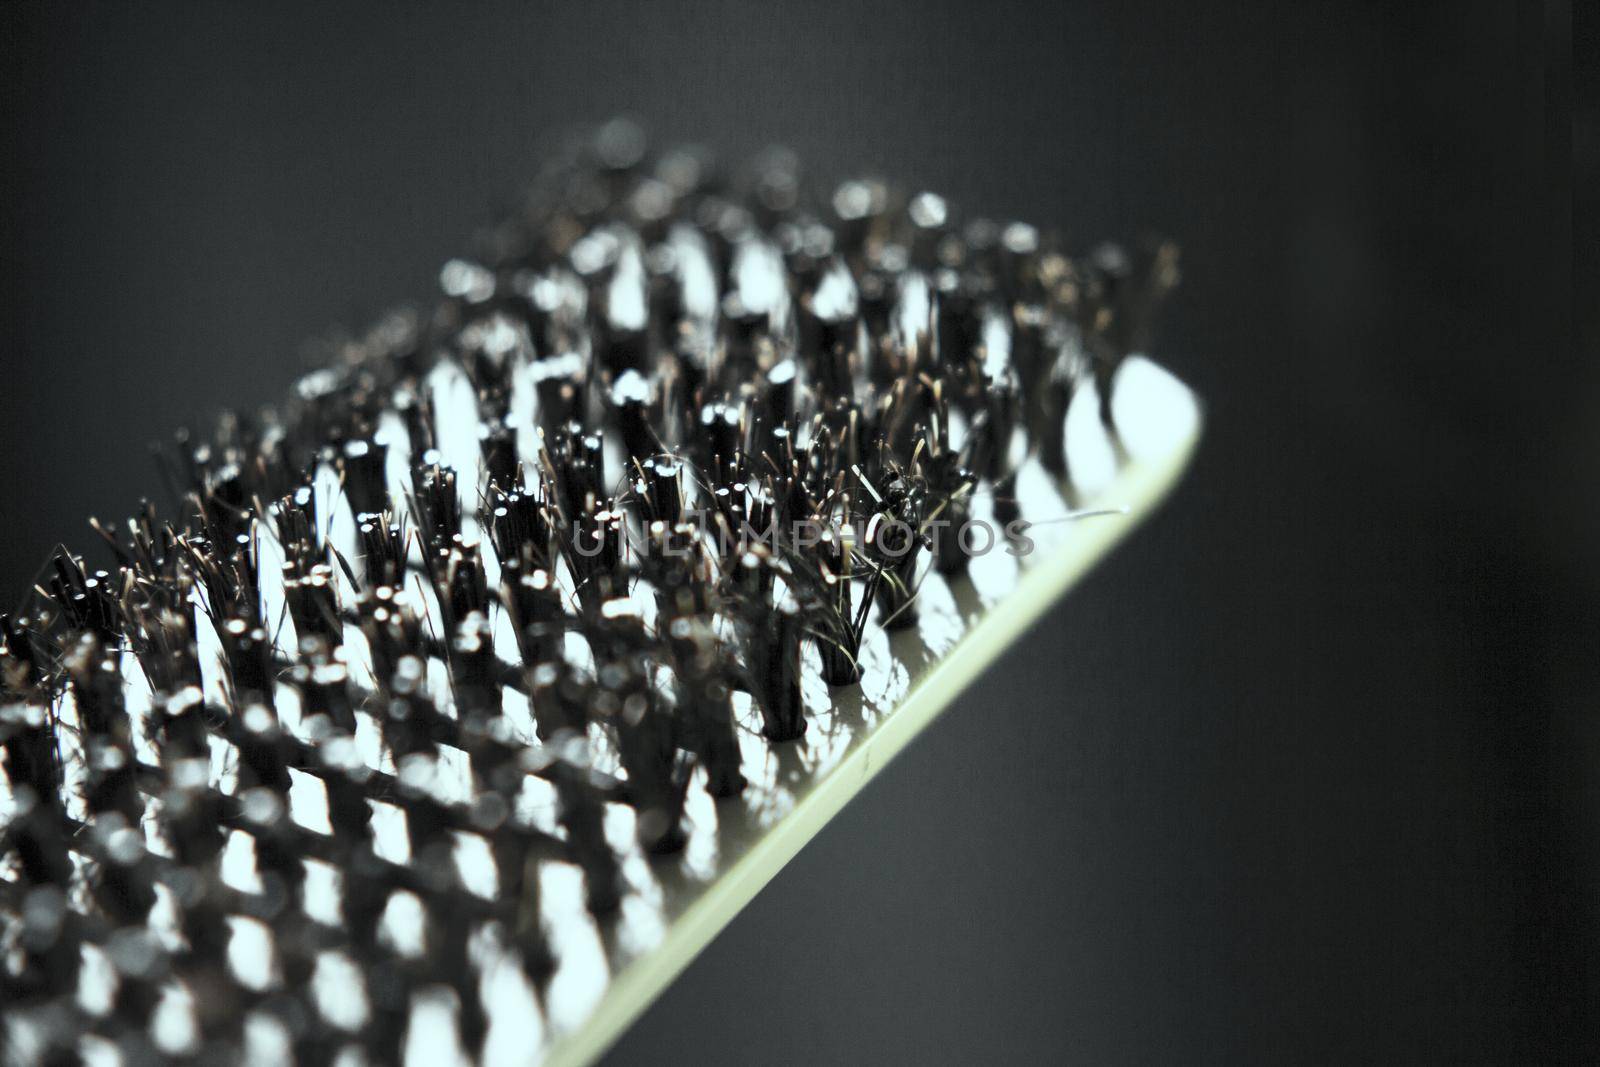 Hair brush with plastic bristles for straightening hair. No people